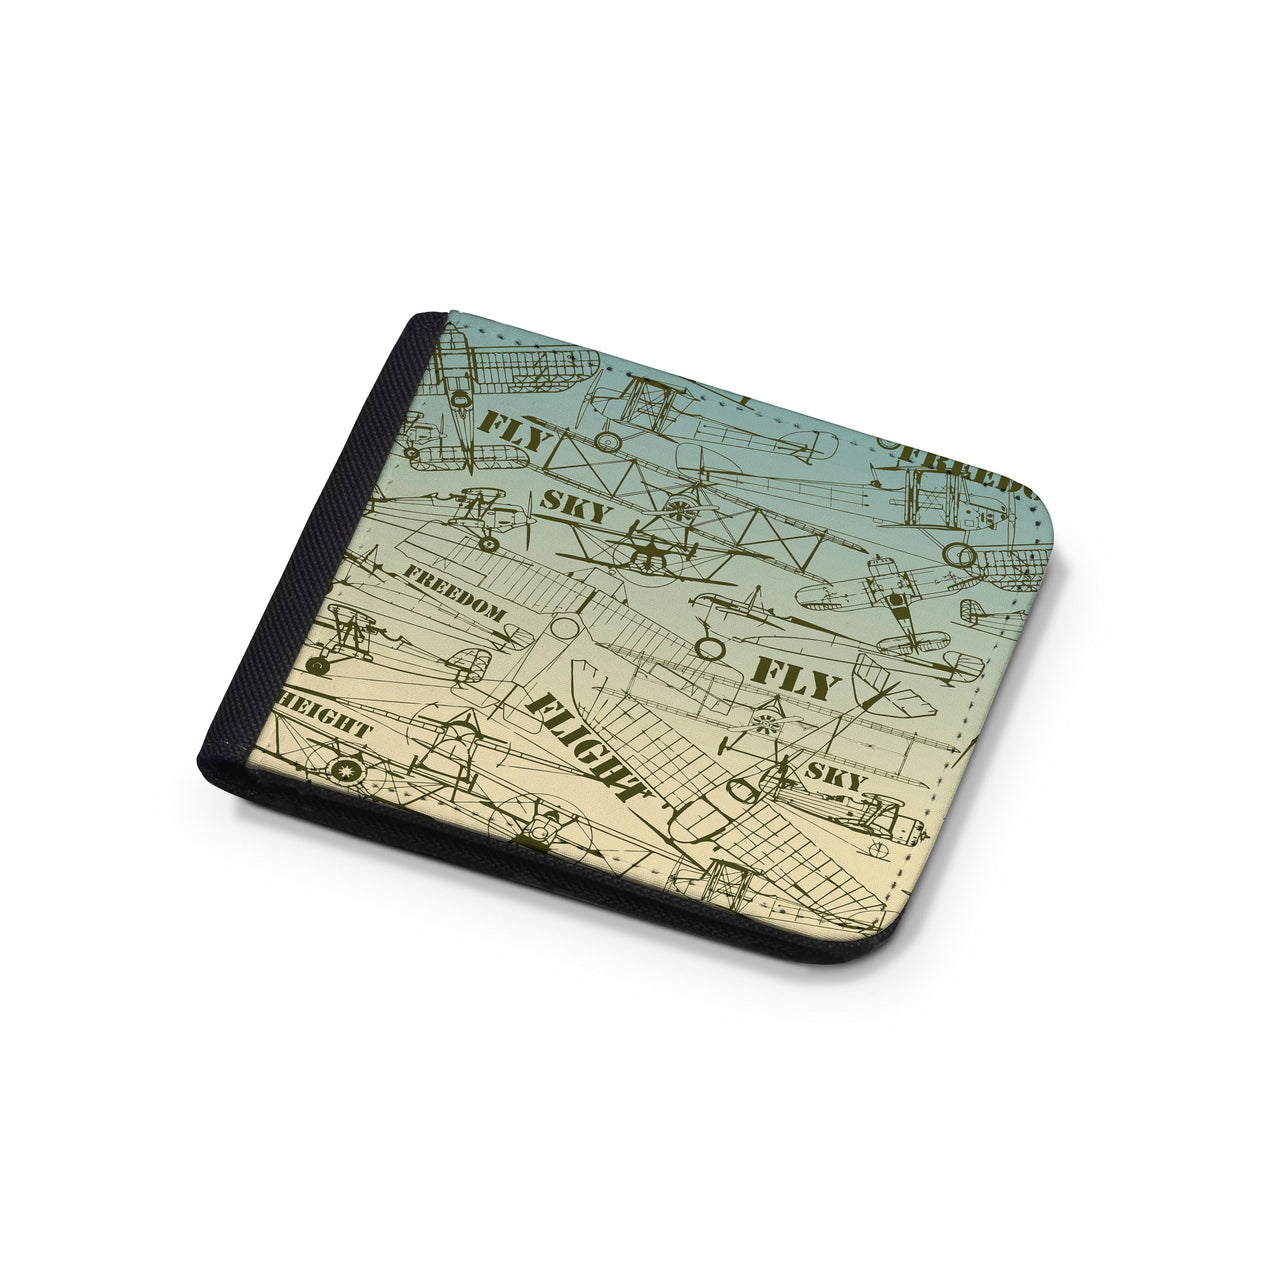 Retro Airplanes & Text Designed Wallets